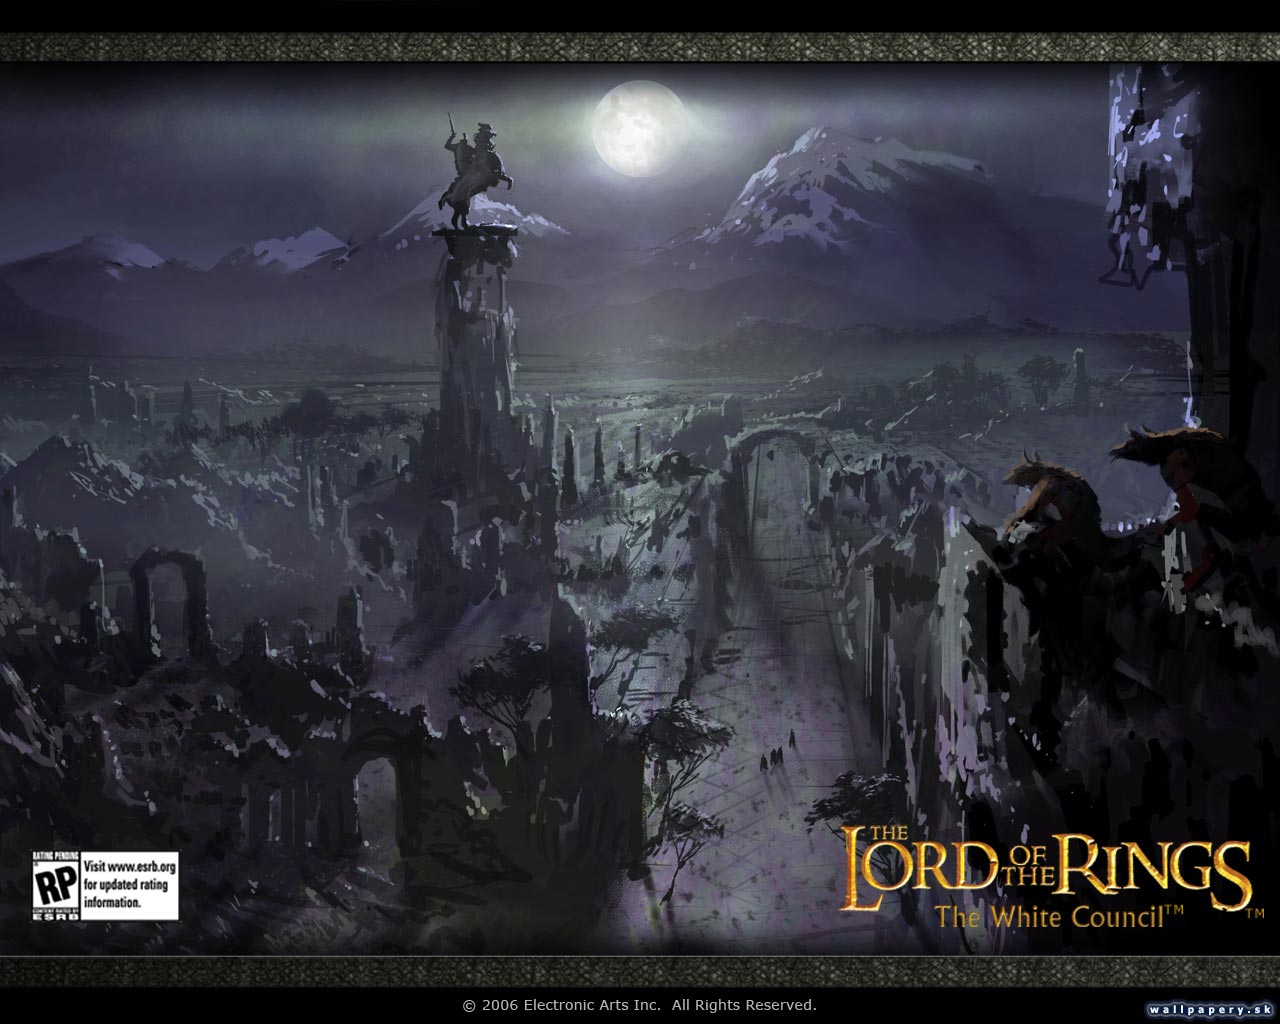 The Lord of the Rings: The White Council - wallpaper 4